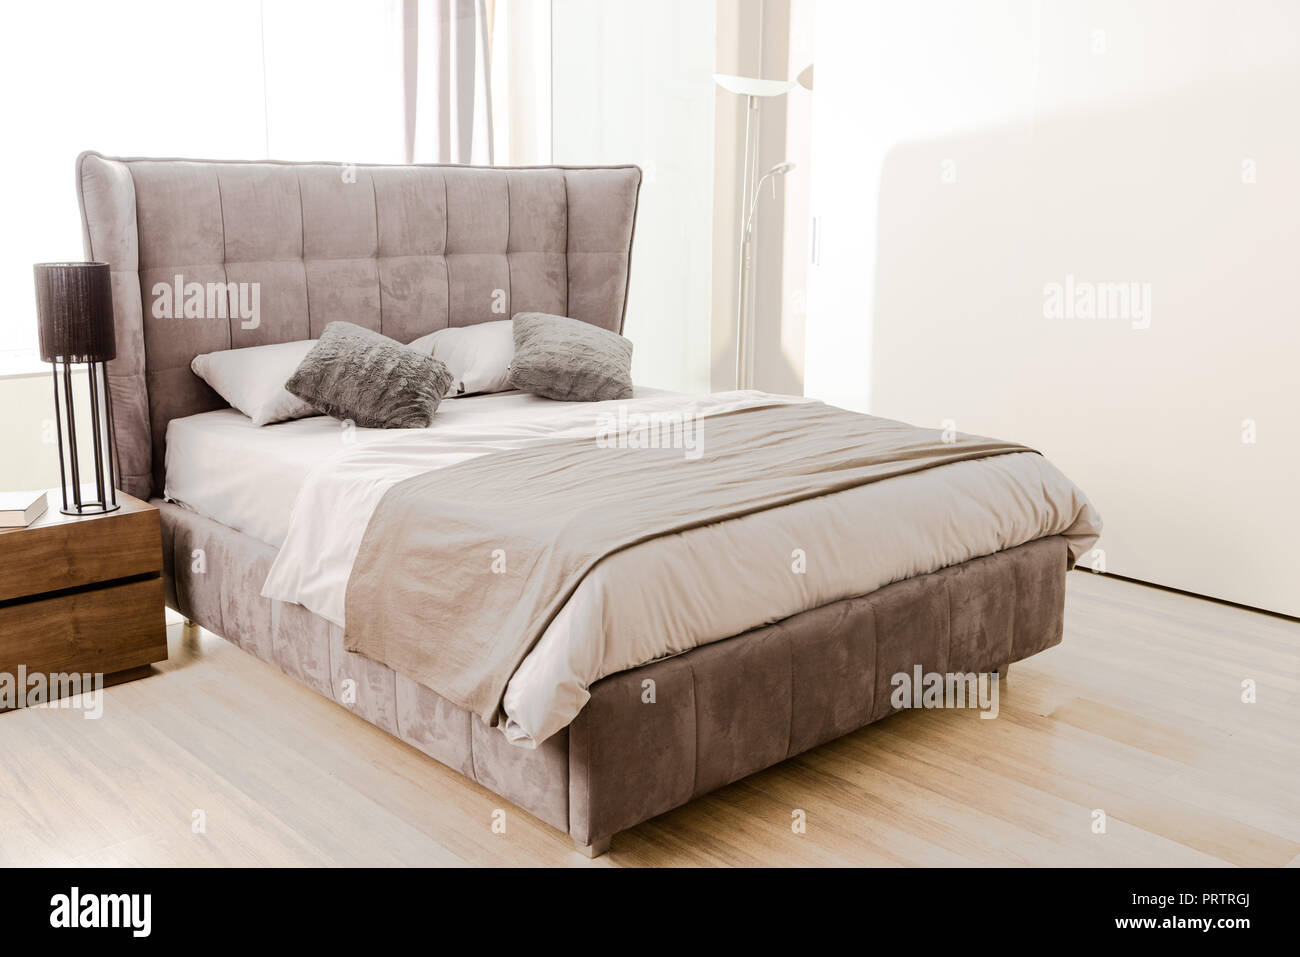 interior of modern bedroom with soft grey bed Stock Photo